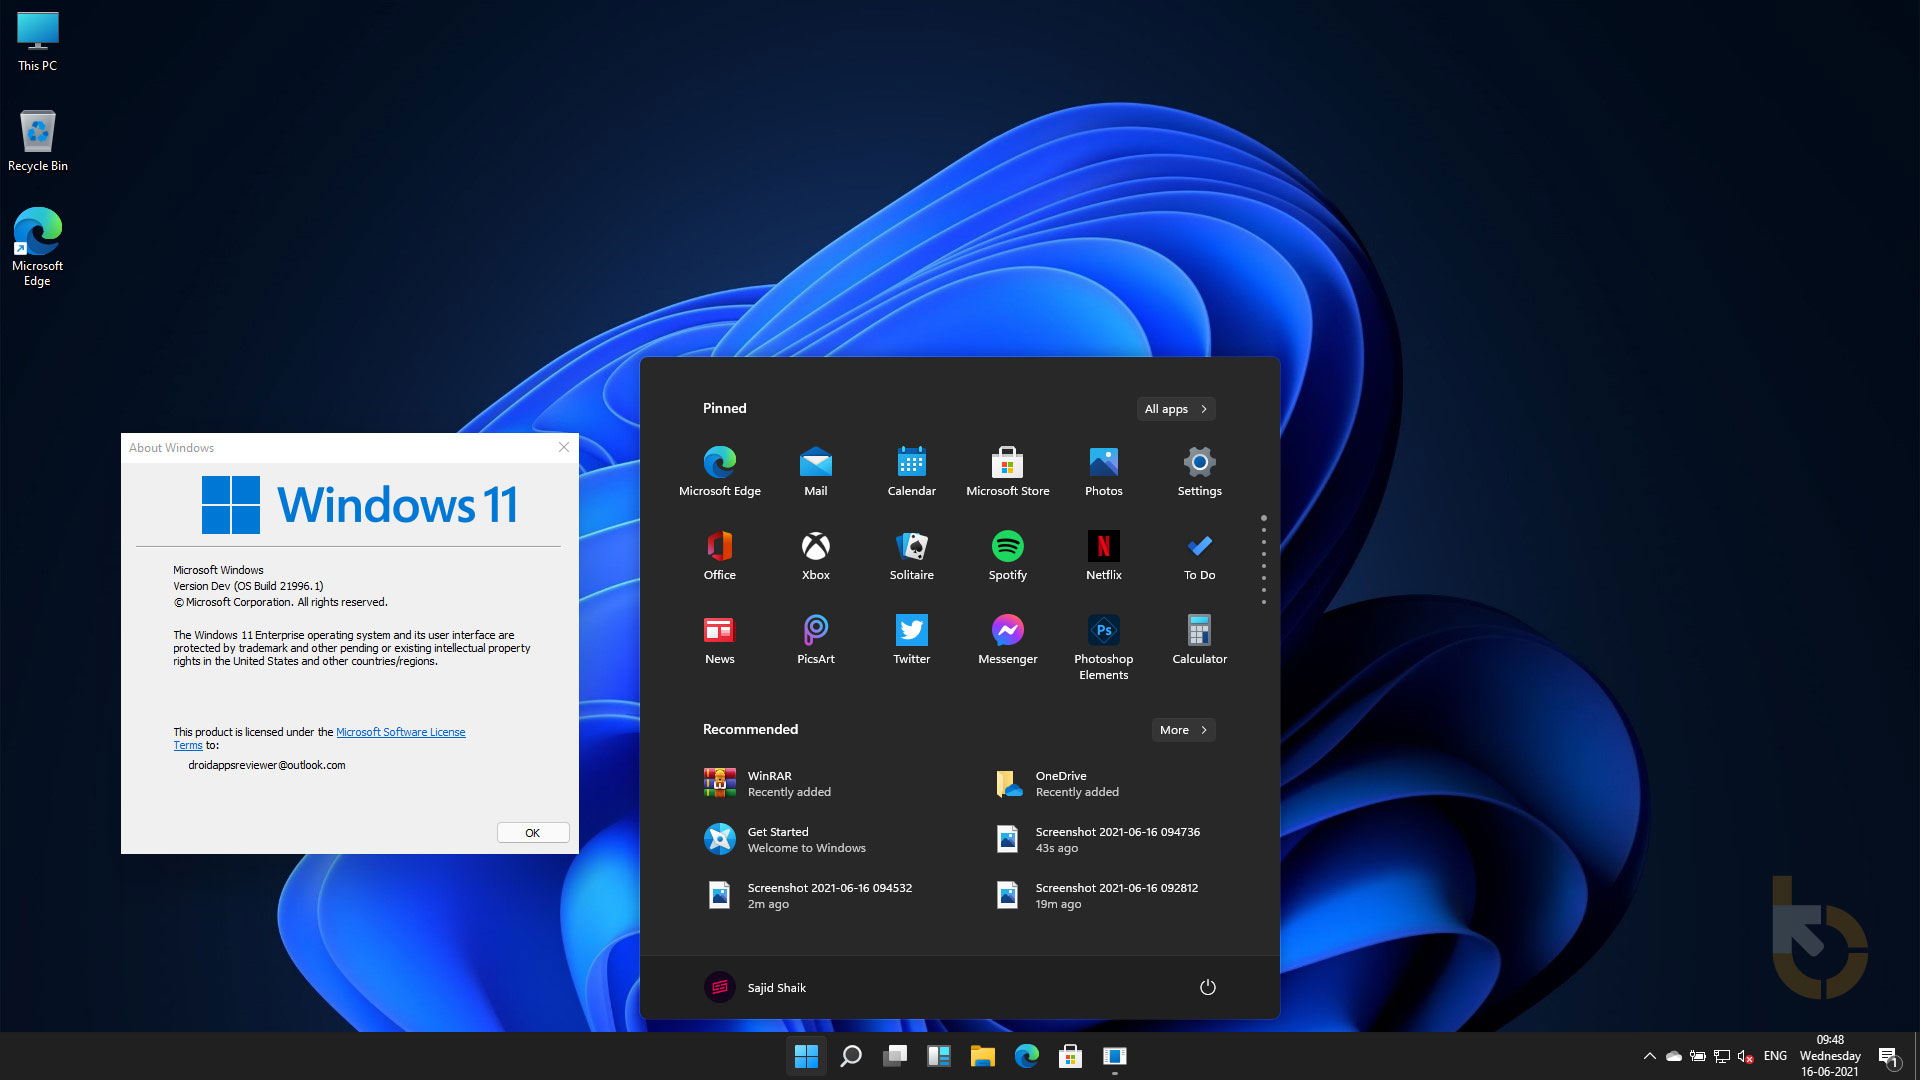 Windows 11 is now available: Here is your checklist for the upgrade